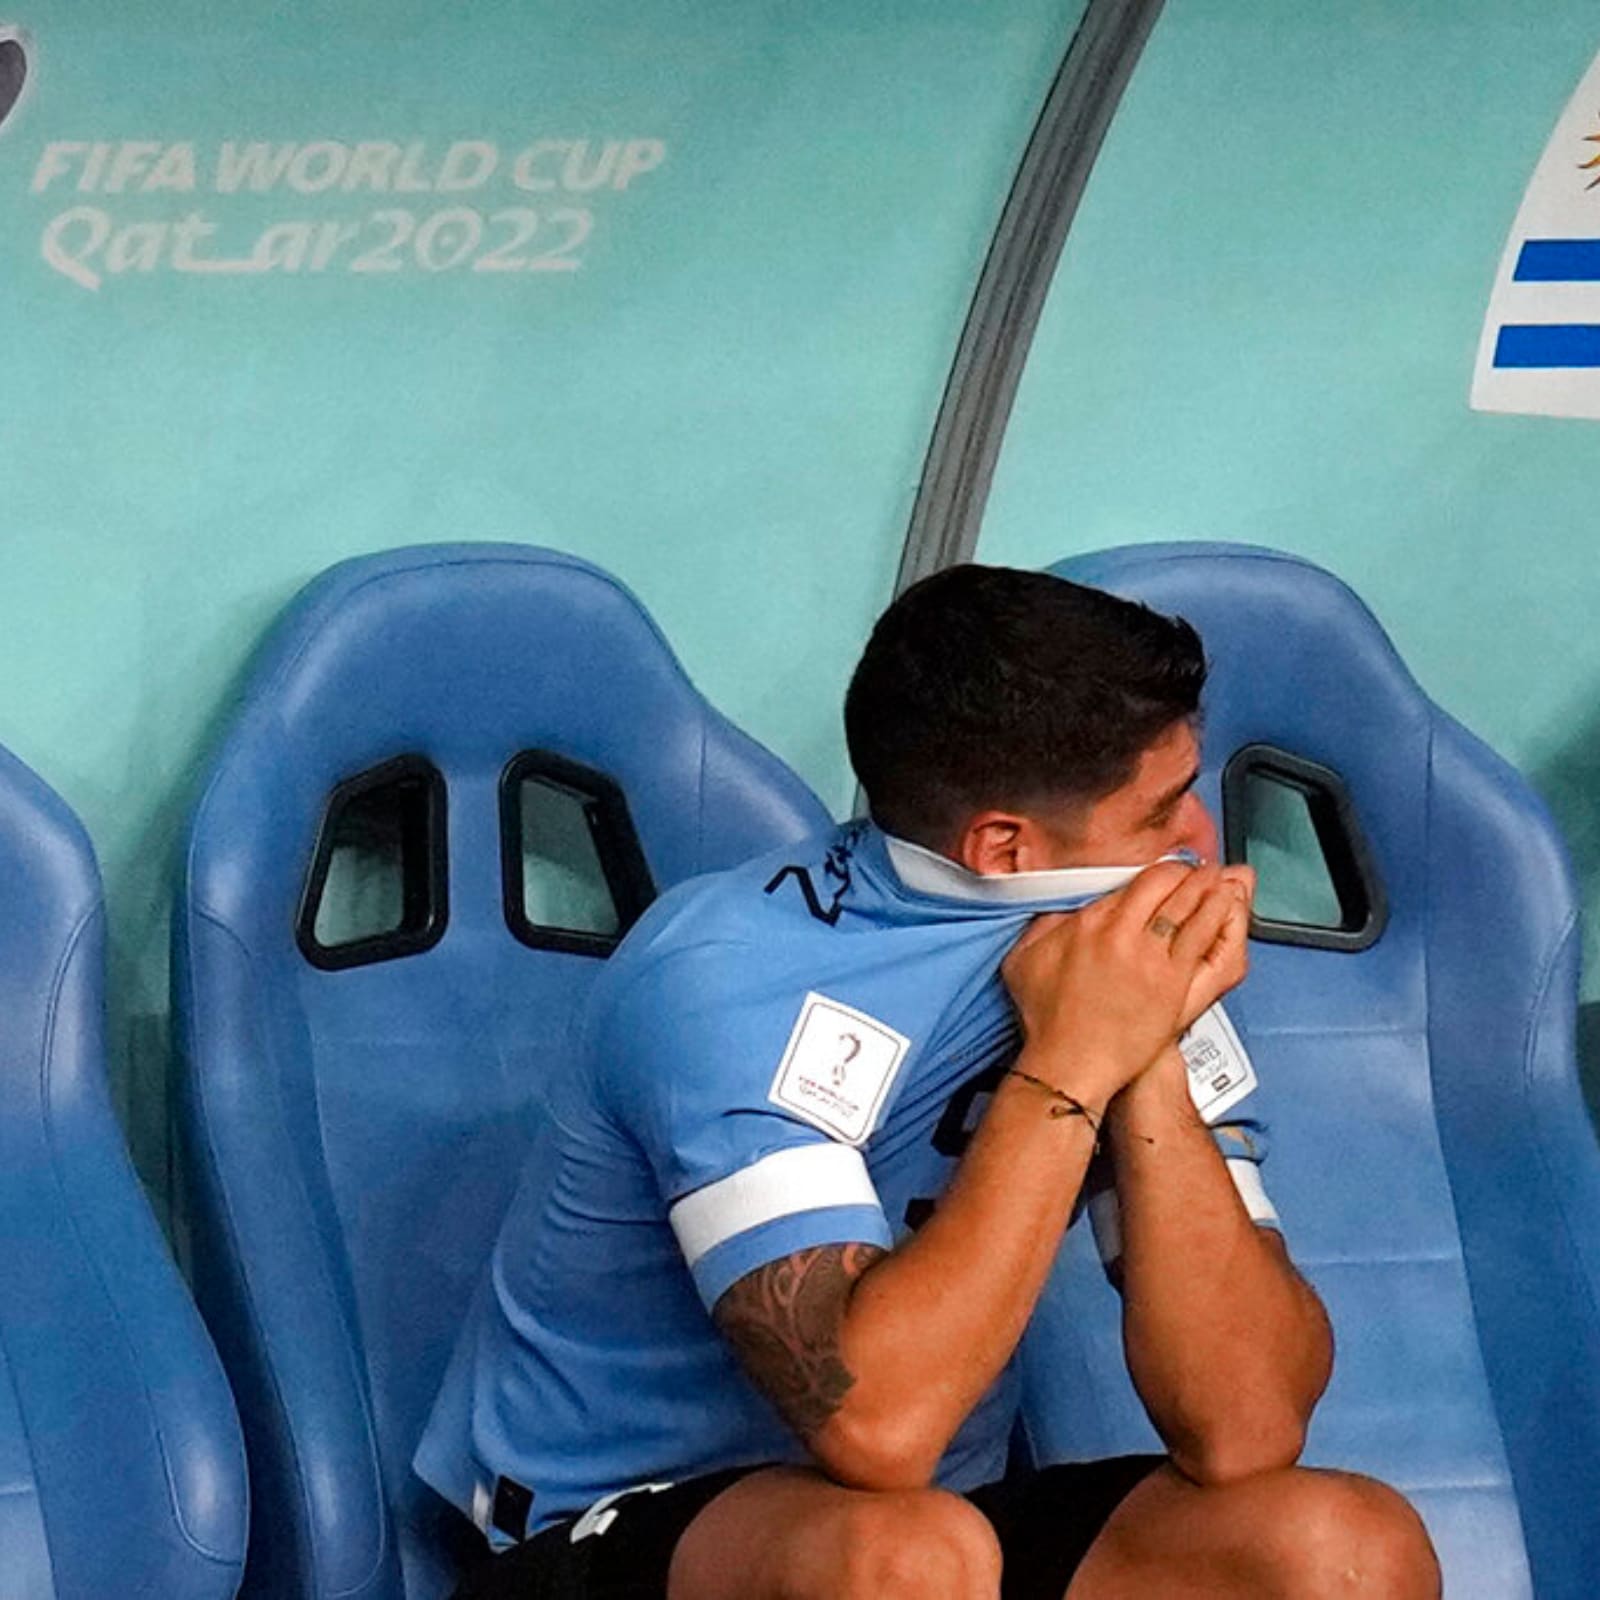 Tears for Suarez! Uruguay fall at group stages after Portugal fail to do  them a World Cup favour